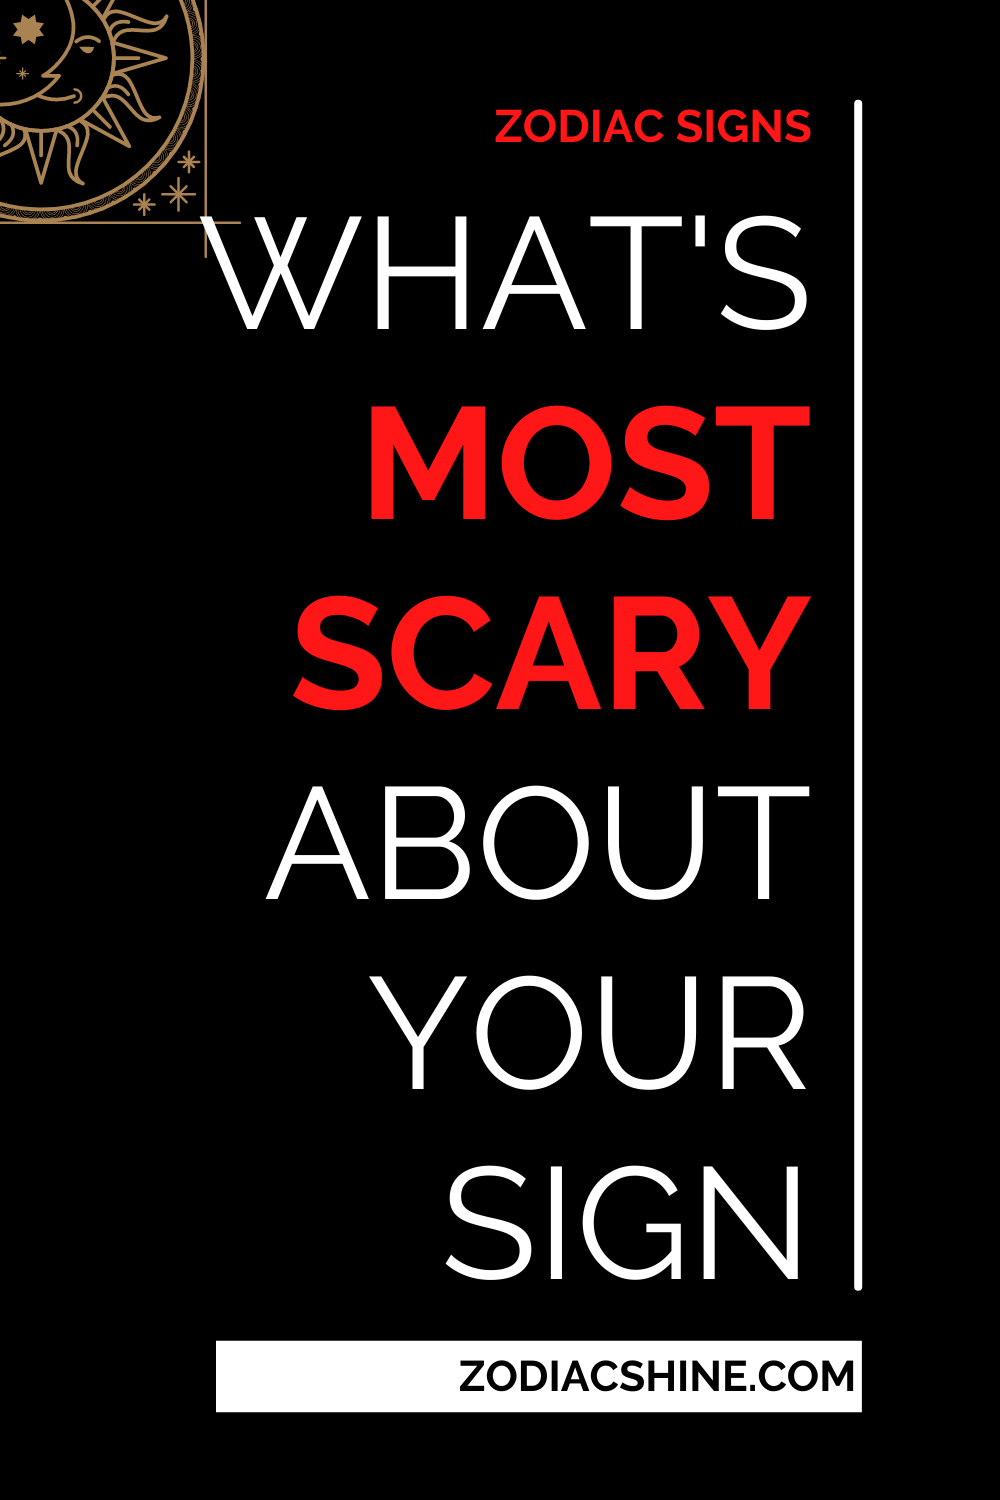 What's Most Scary About Your Sign